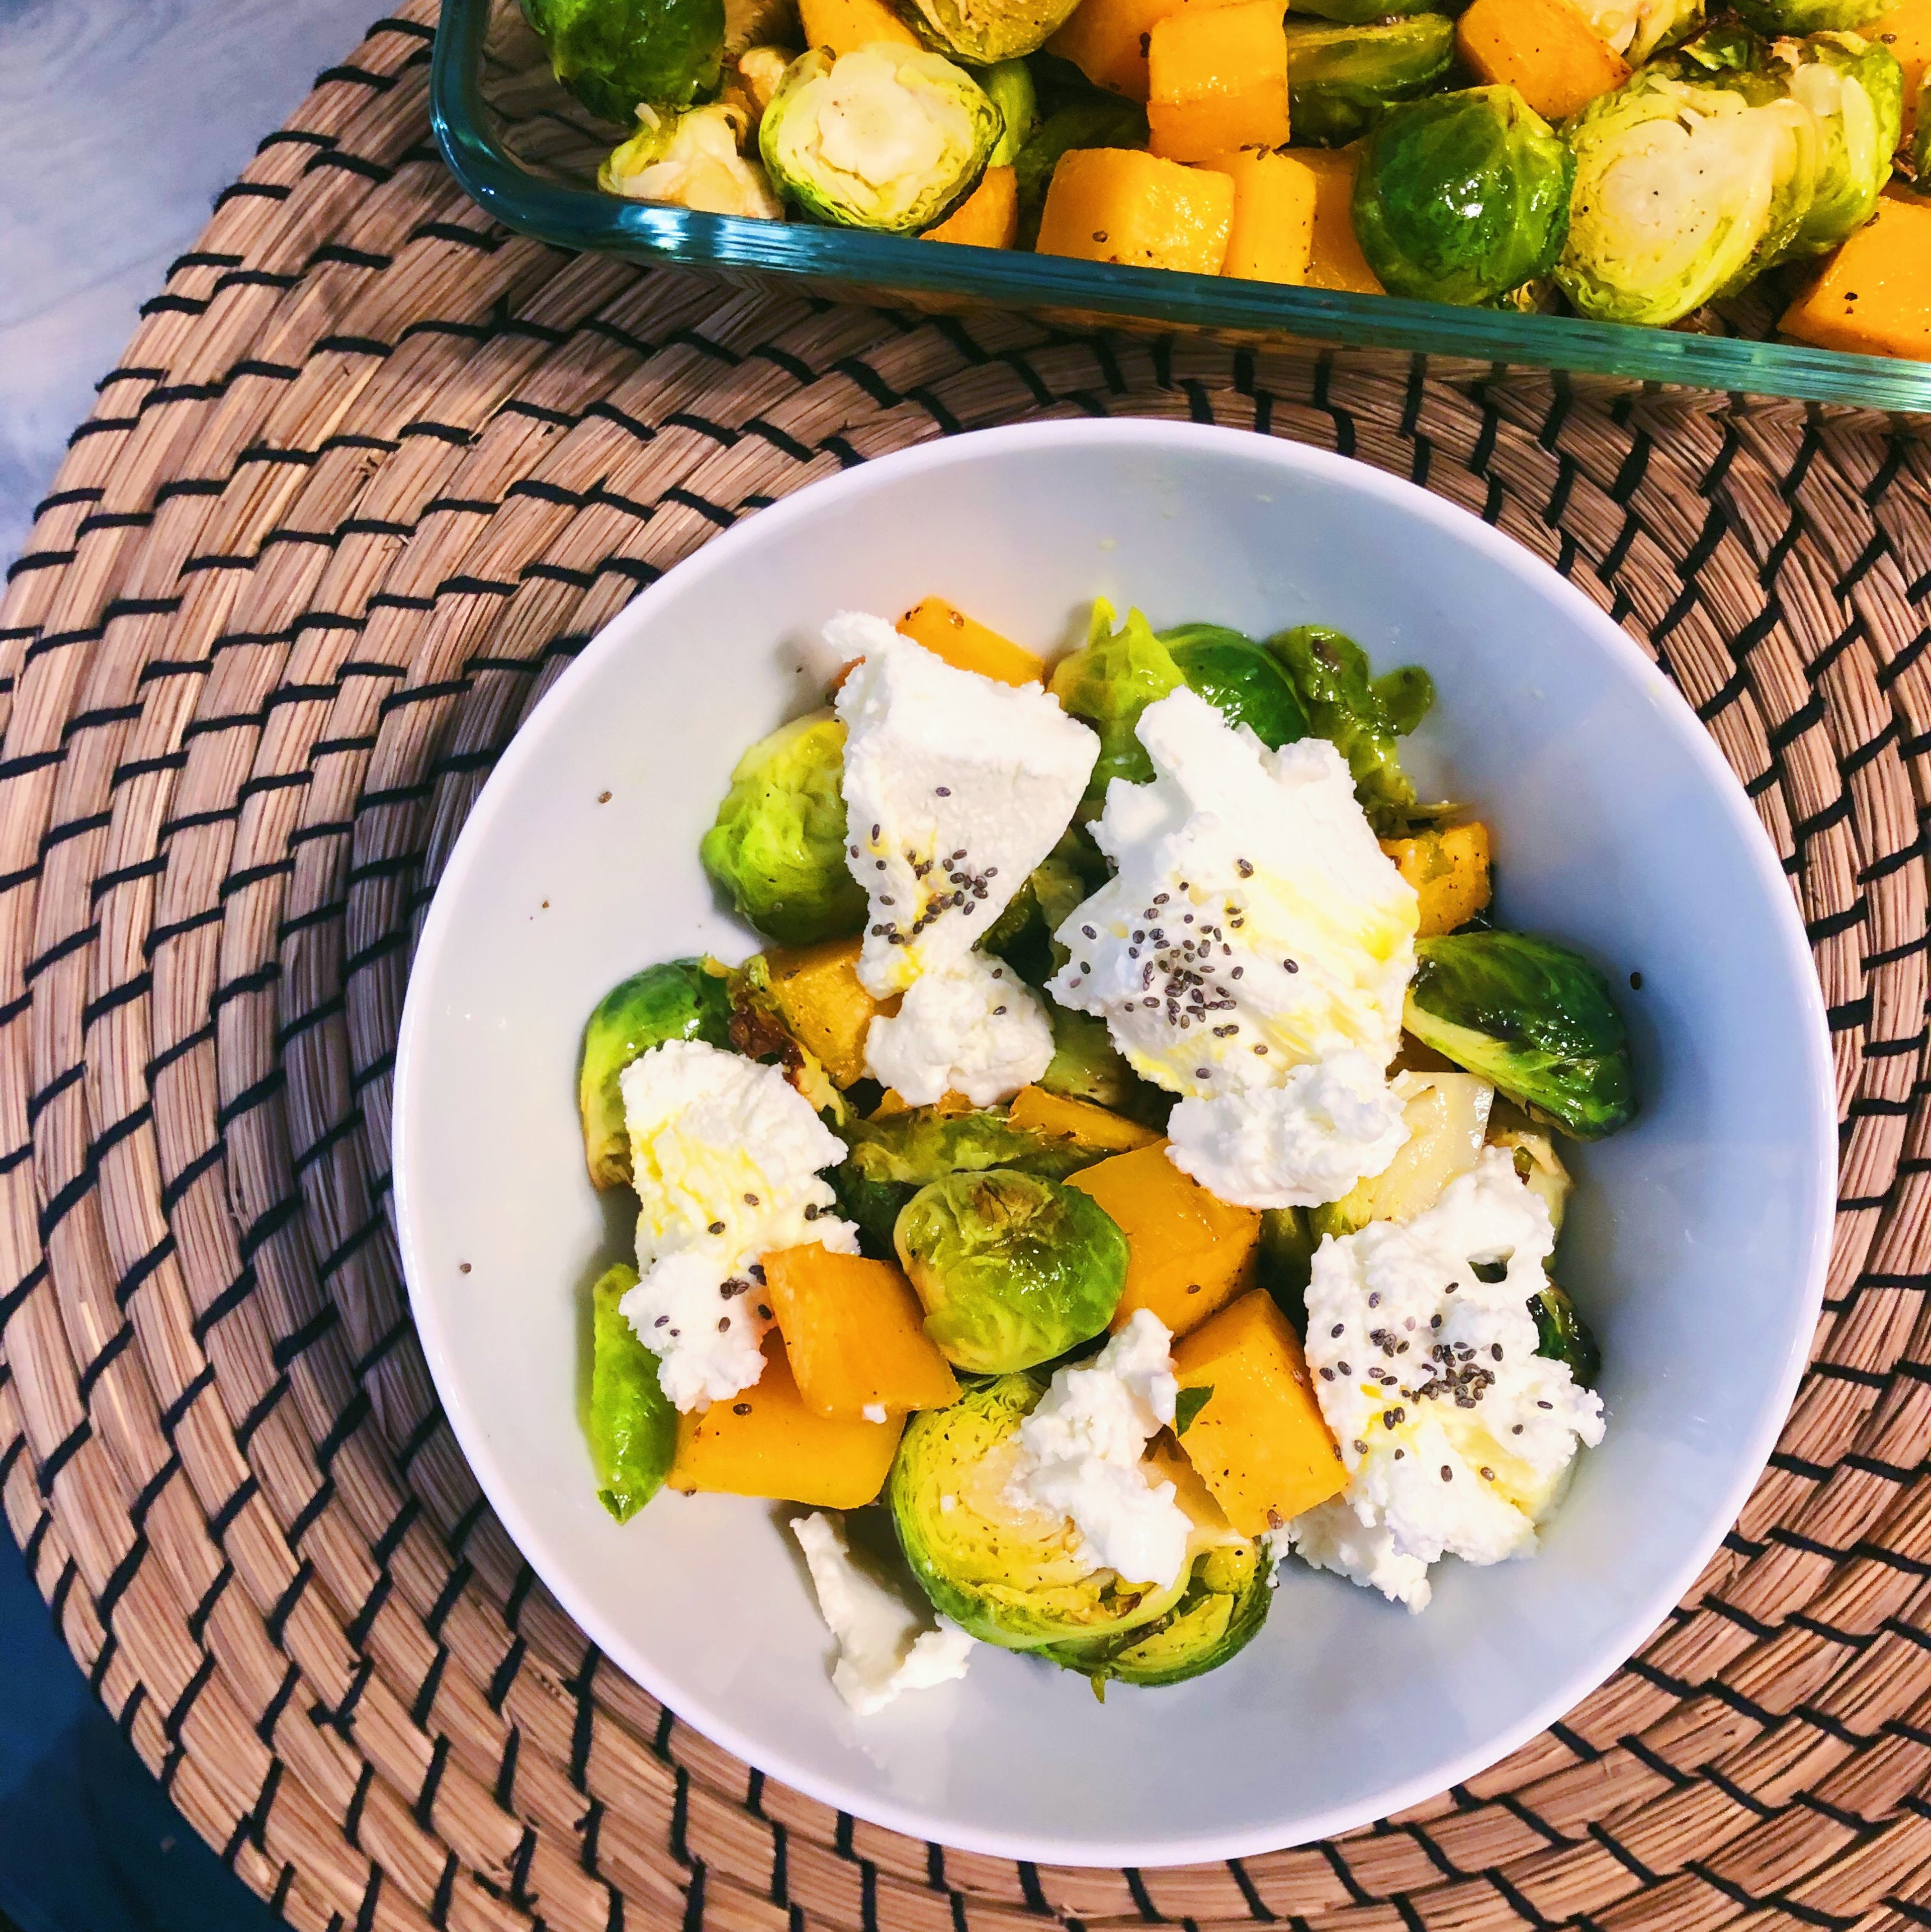 Roasted winter vegetables and goat cheese